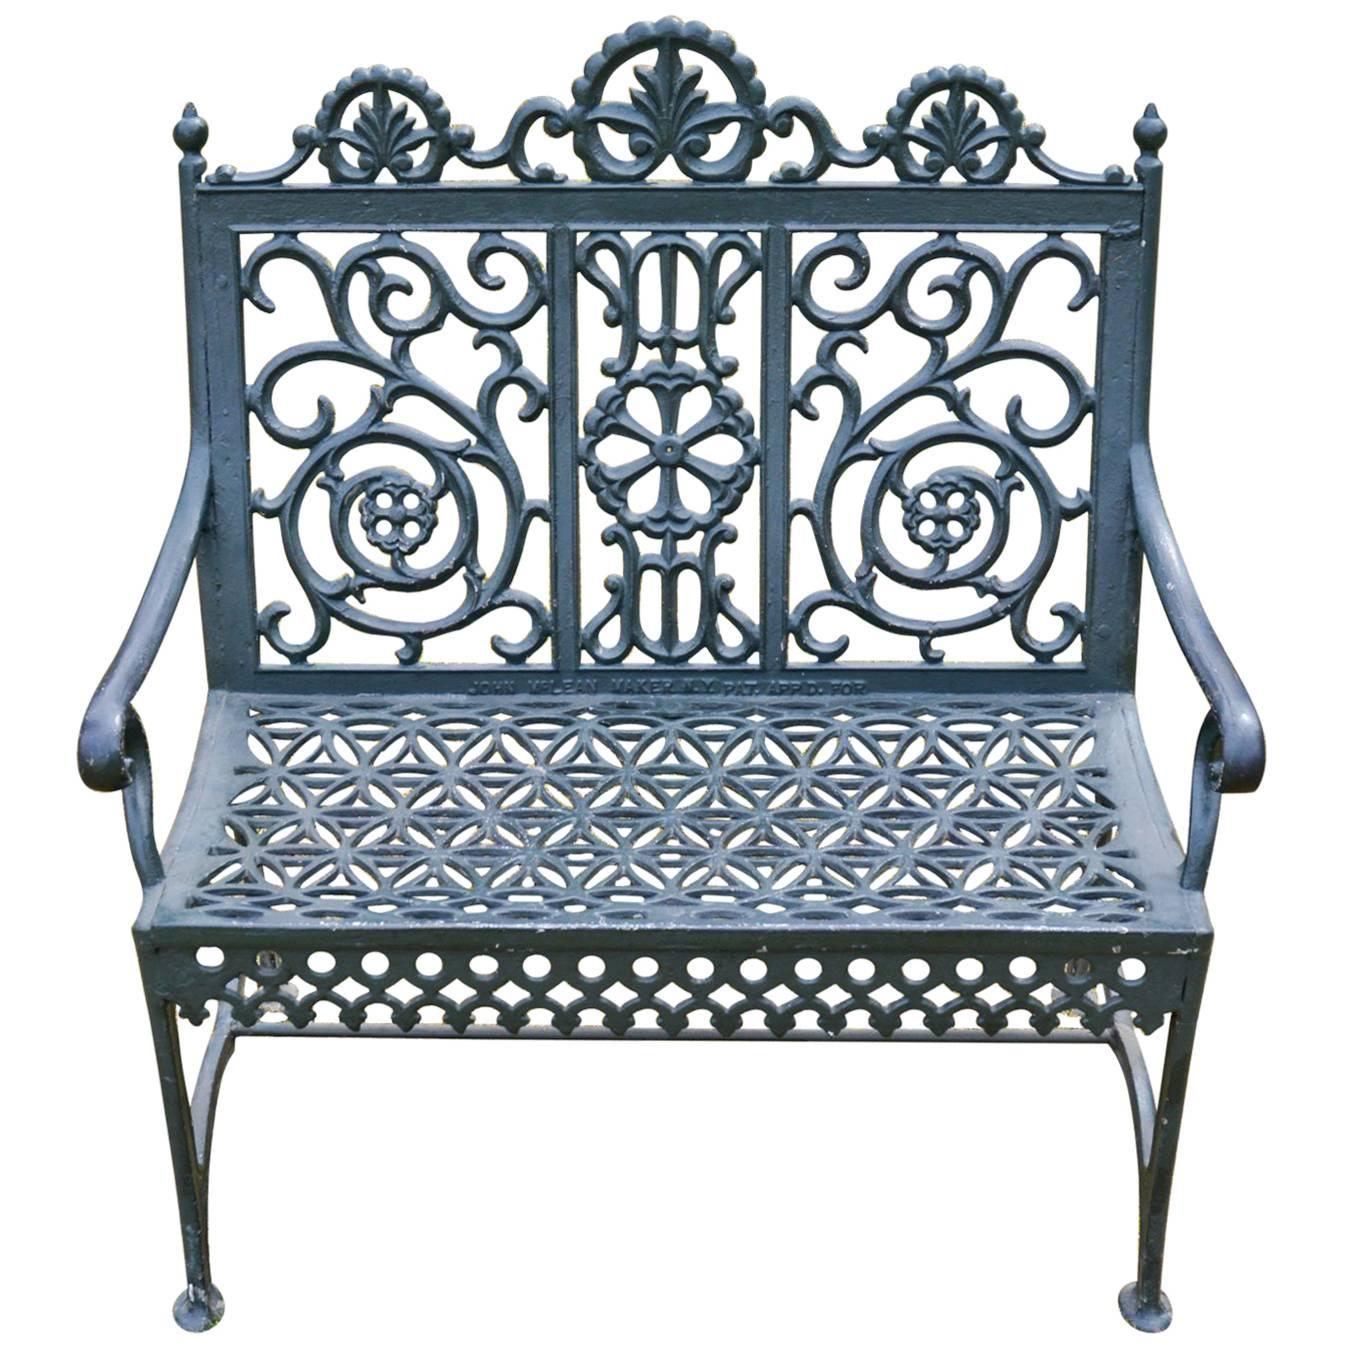 Cast Iron Bench by John McLean